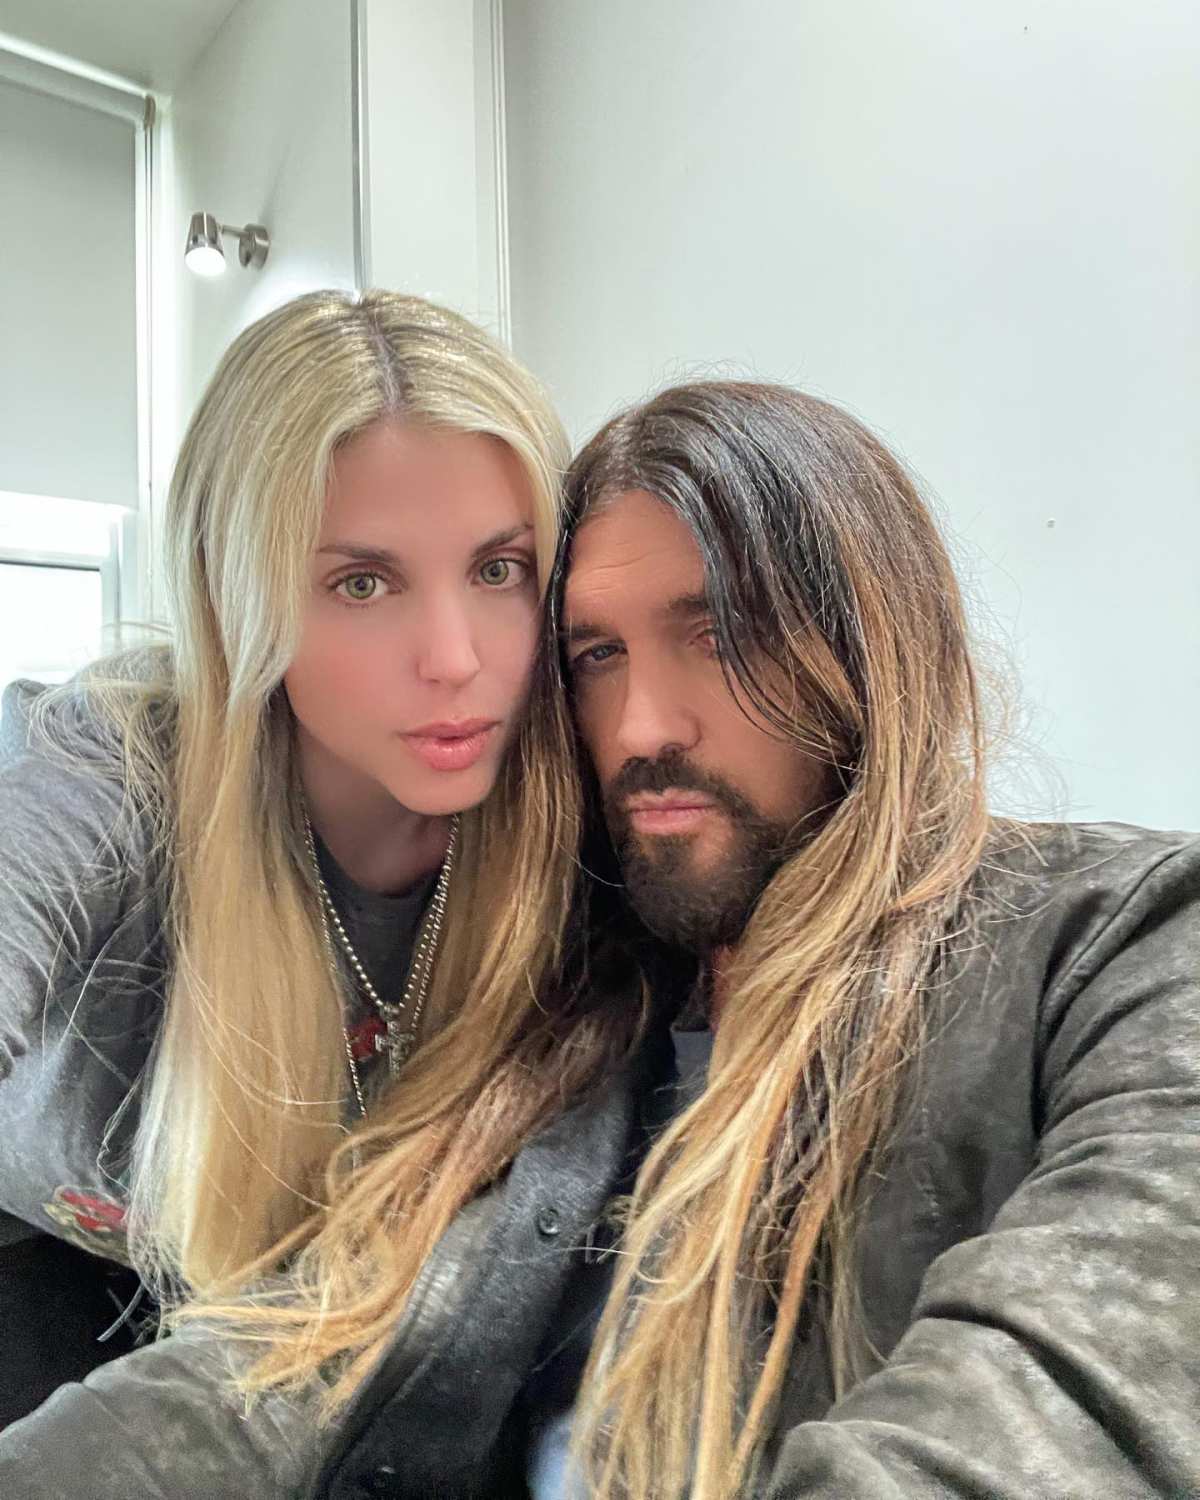 Firerose: 5 Things to Know About Billy Ray Cyrus' New Girlfriend